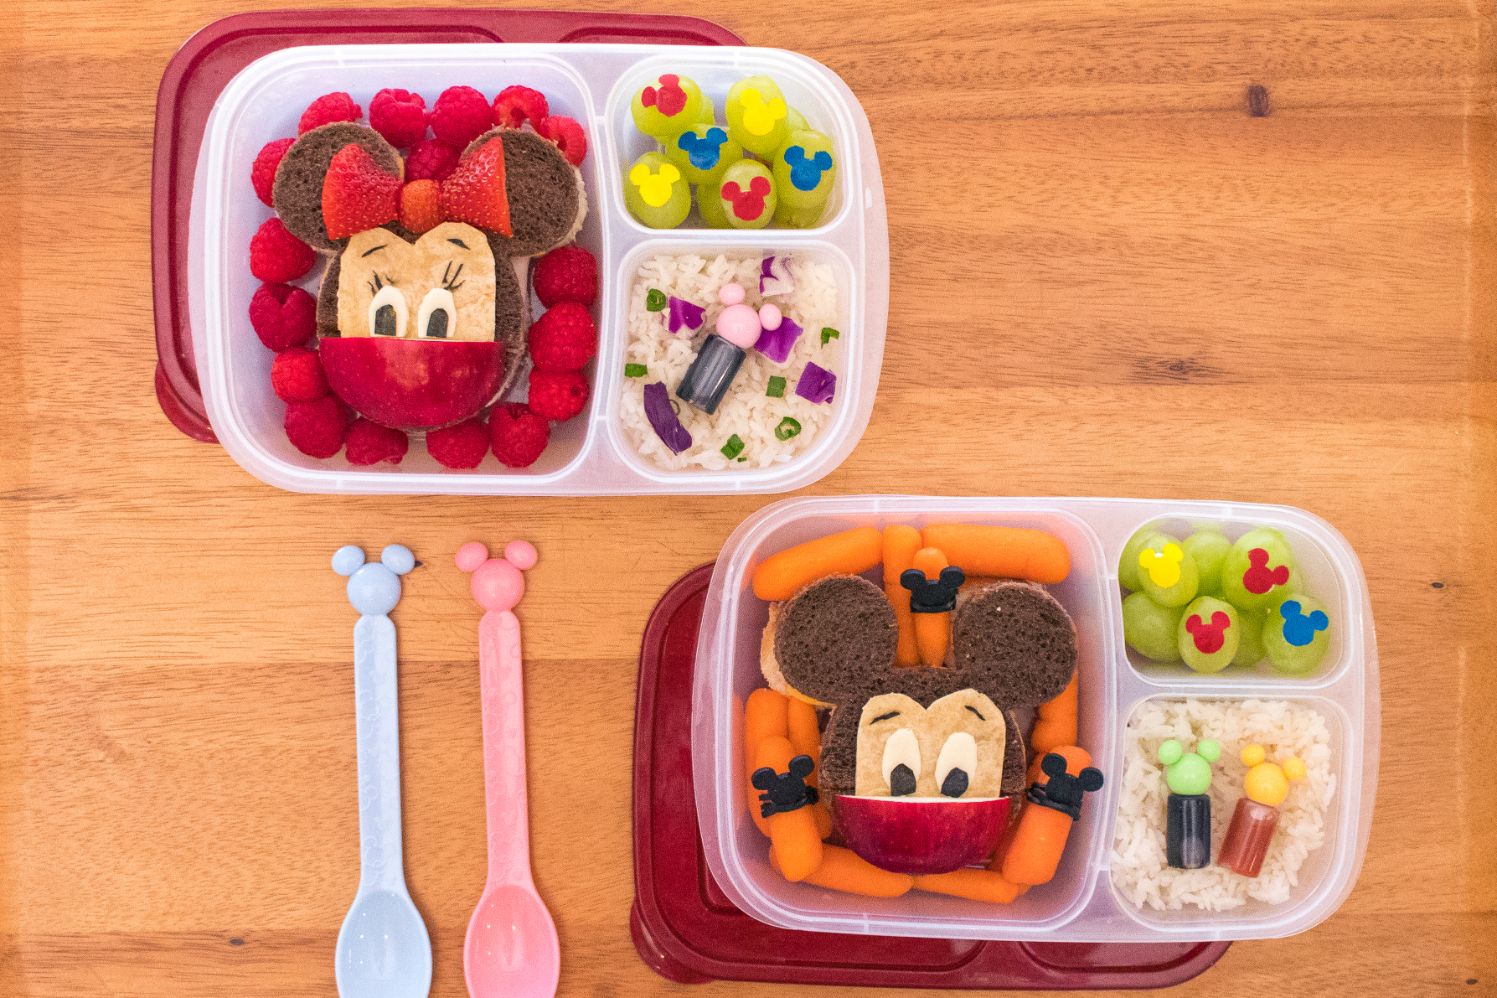 Mickey & Minnie Mouse lunch boxes